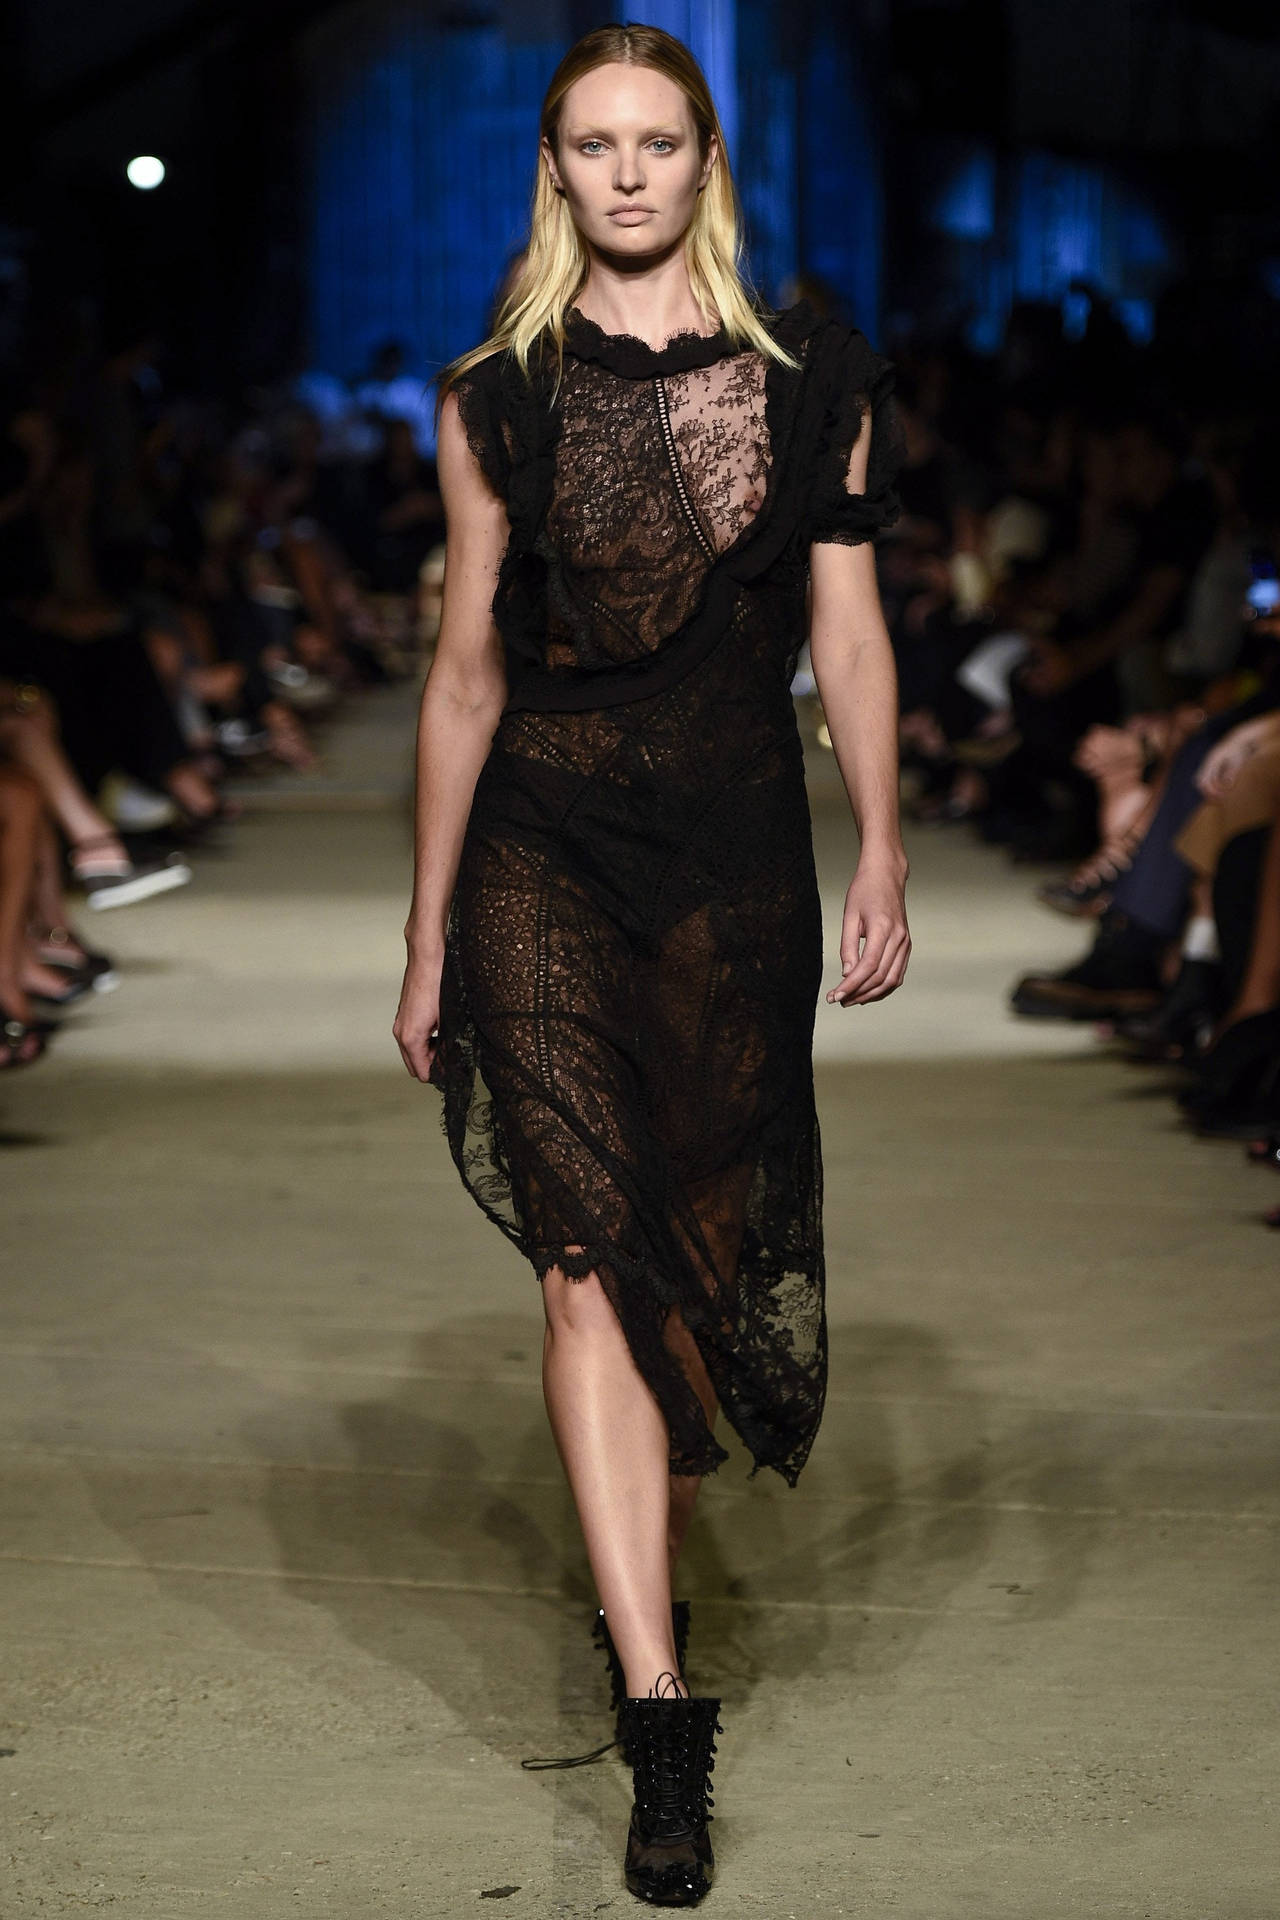 Candice Swanepoel on the runway for Givenchy's Ready-To-Wear 2016 Collection Wallpaper